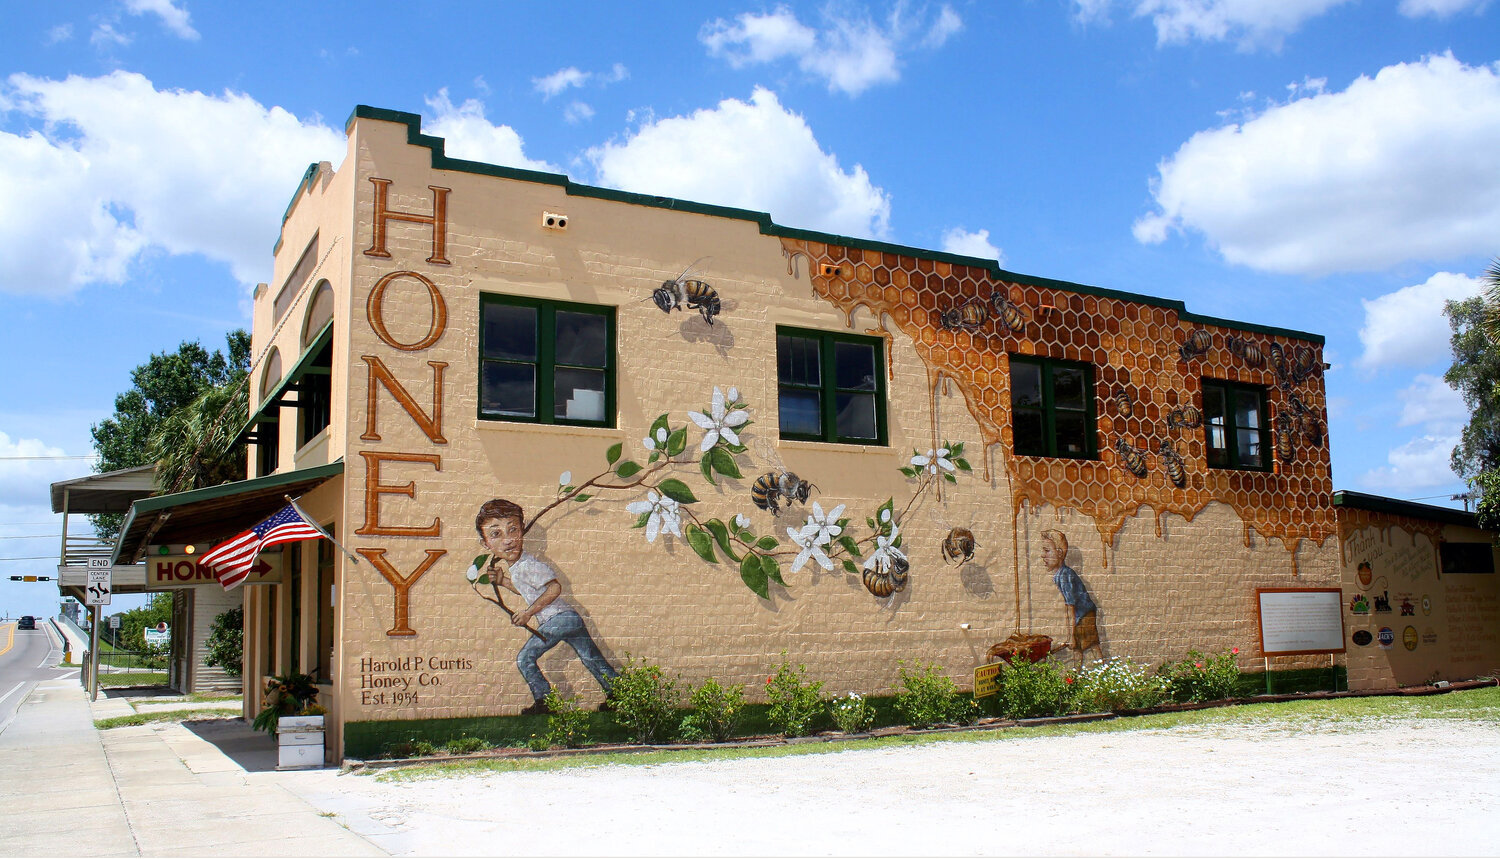 The mural at Harold. P. Curtis Honey Co., in Labelle, Florida, launched "The Good of the Hive." The Wright Center for Community Health is sponsoring one of his trademark murals in downtown Scranton.